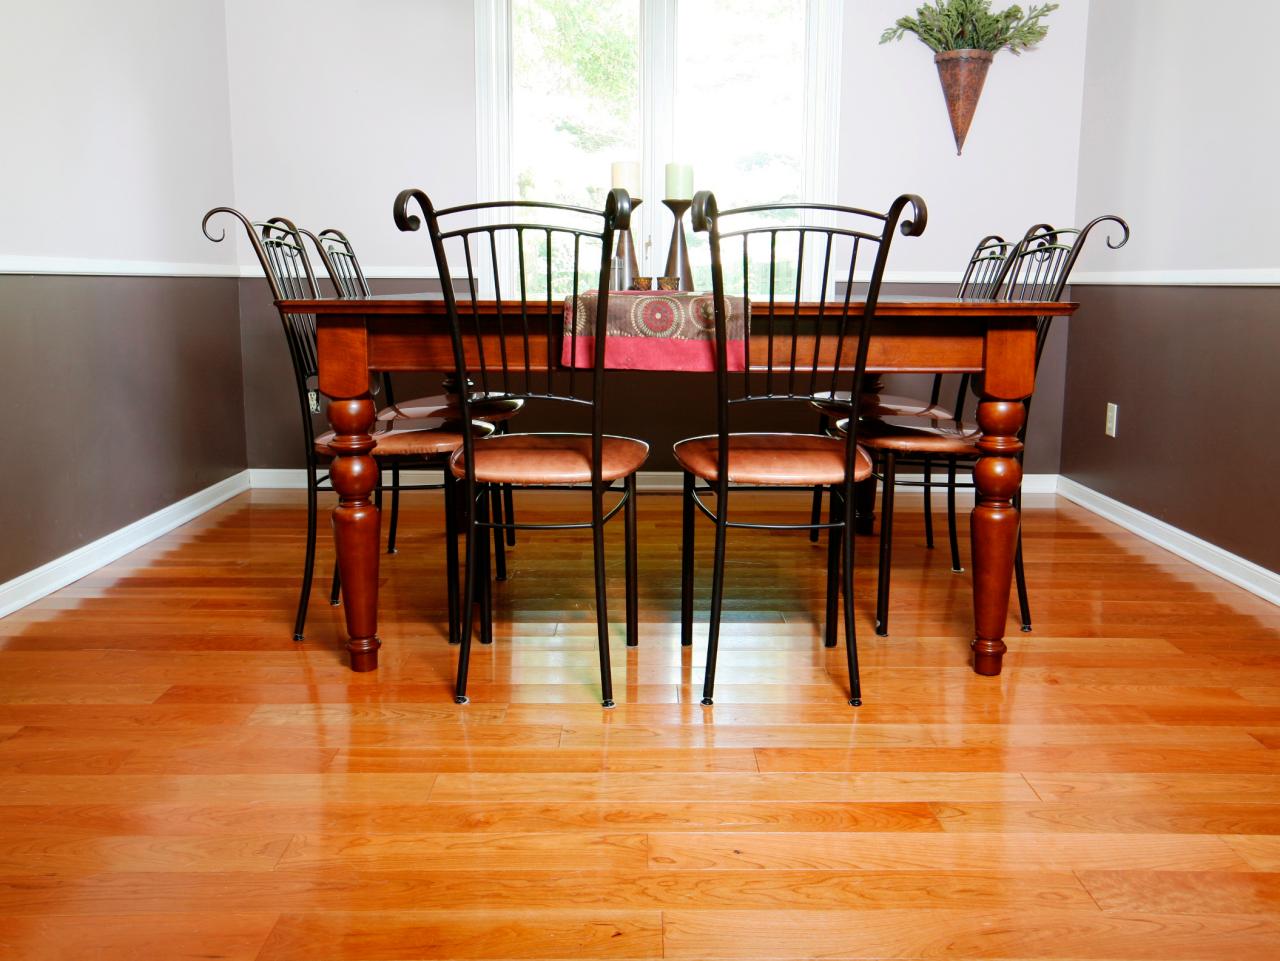 How To Install Prefinished Solid, Prefinished Solid Oak Hardwood Flooring